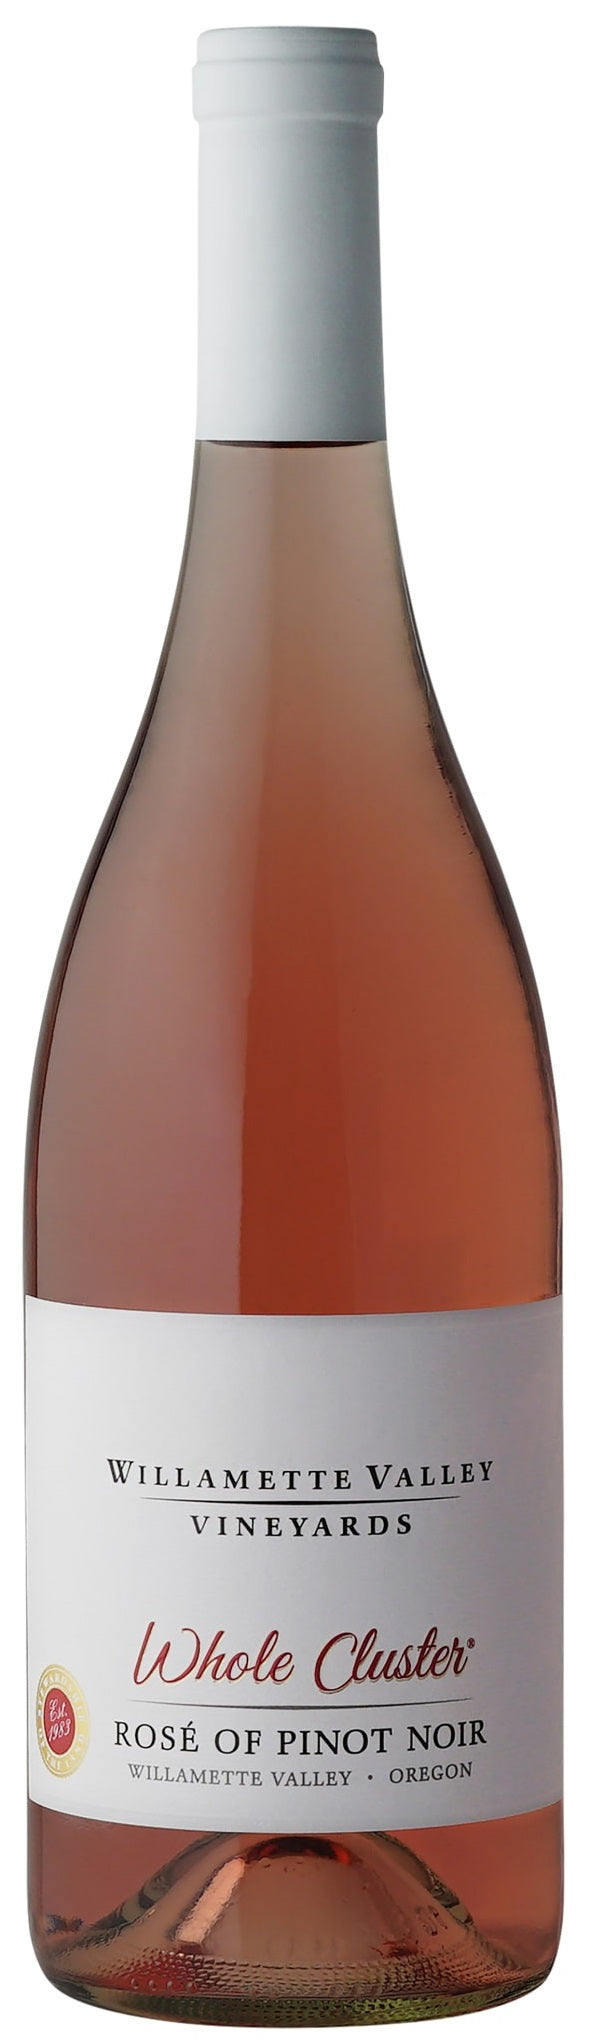 Willamette Valley Vineyards Rose Of Pinot Noir Whole Cluster 2020